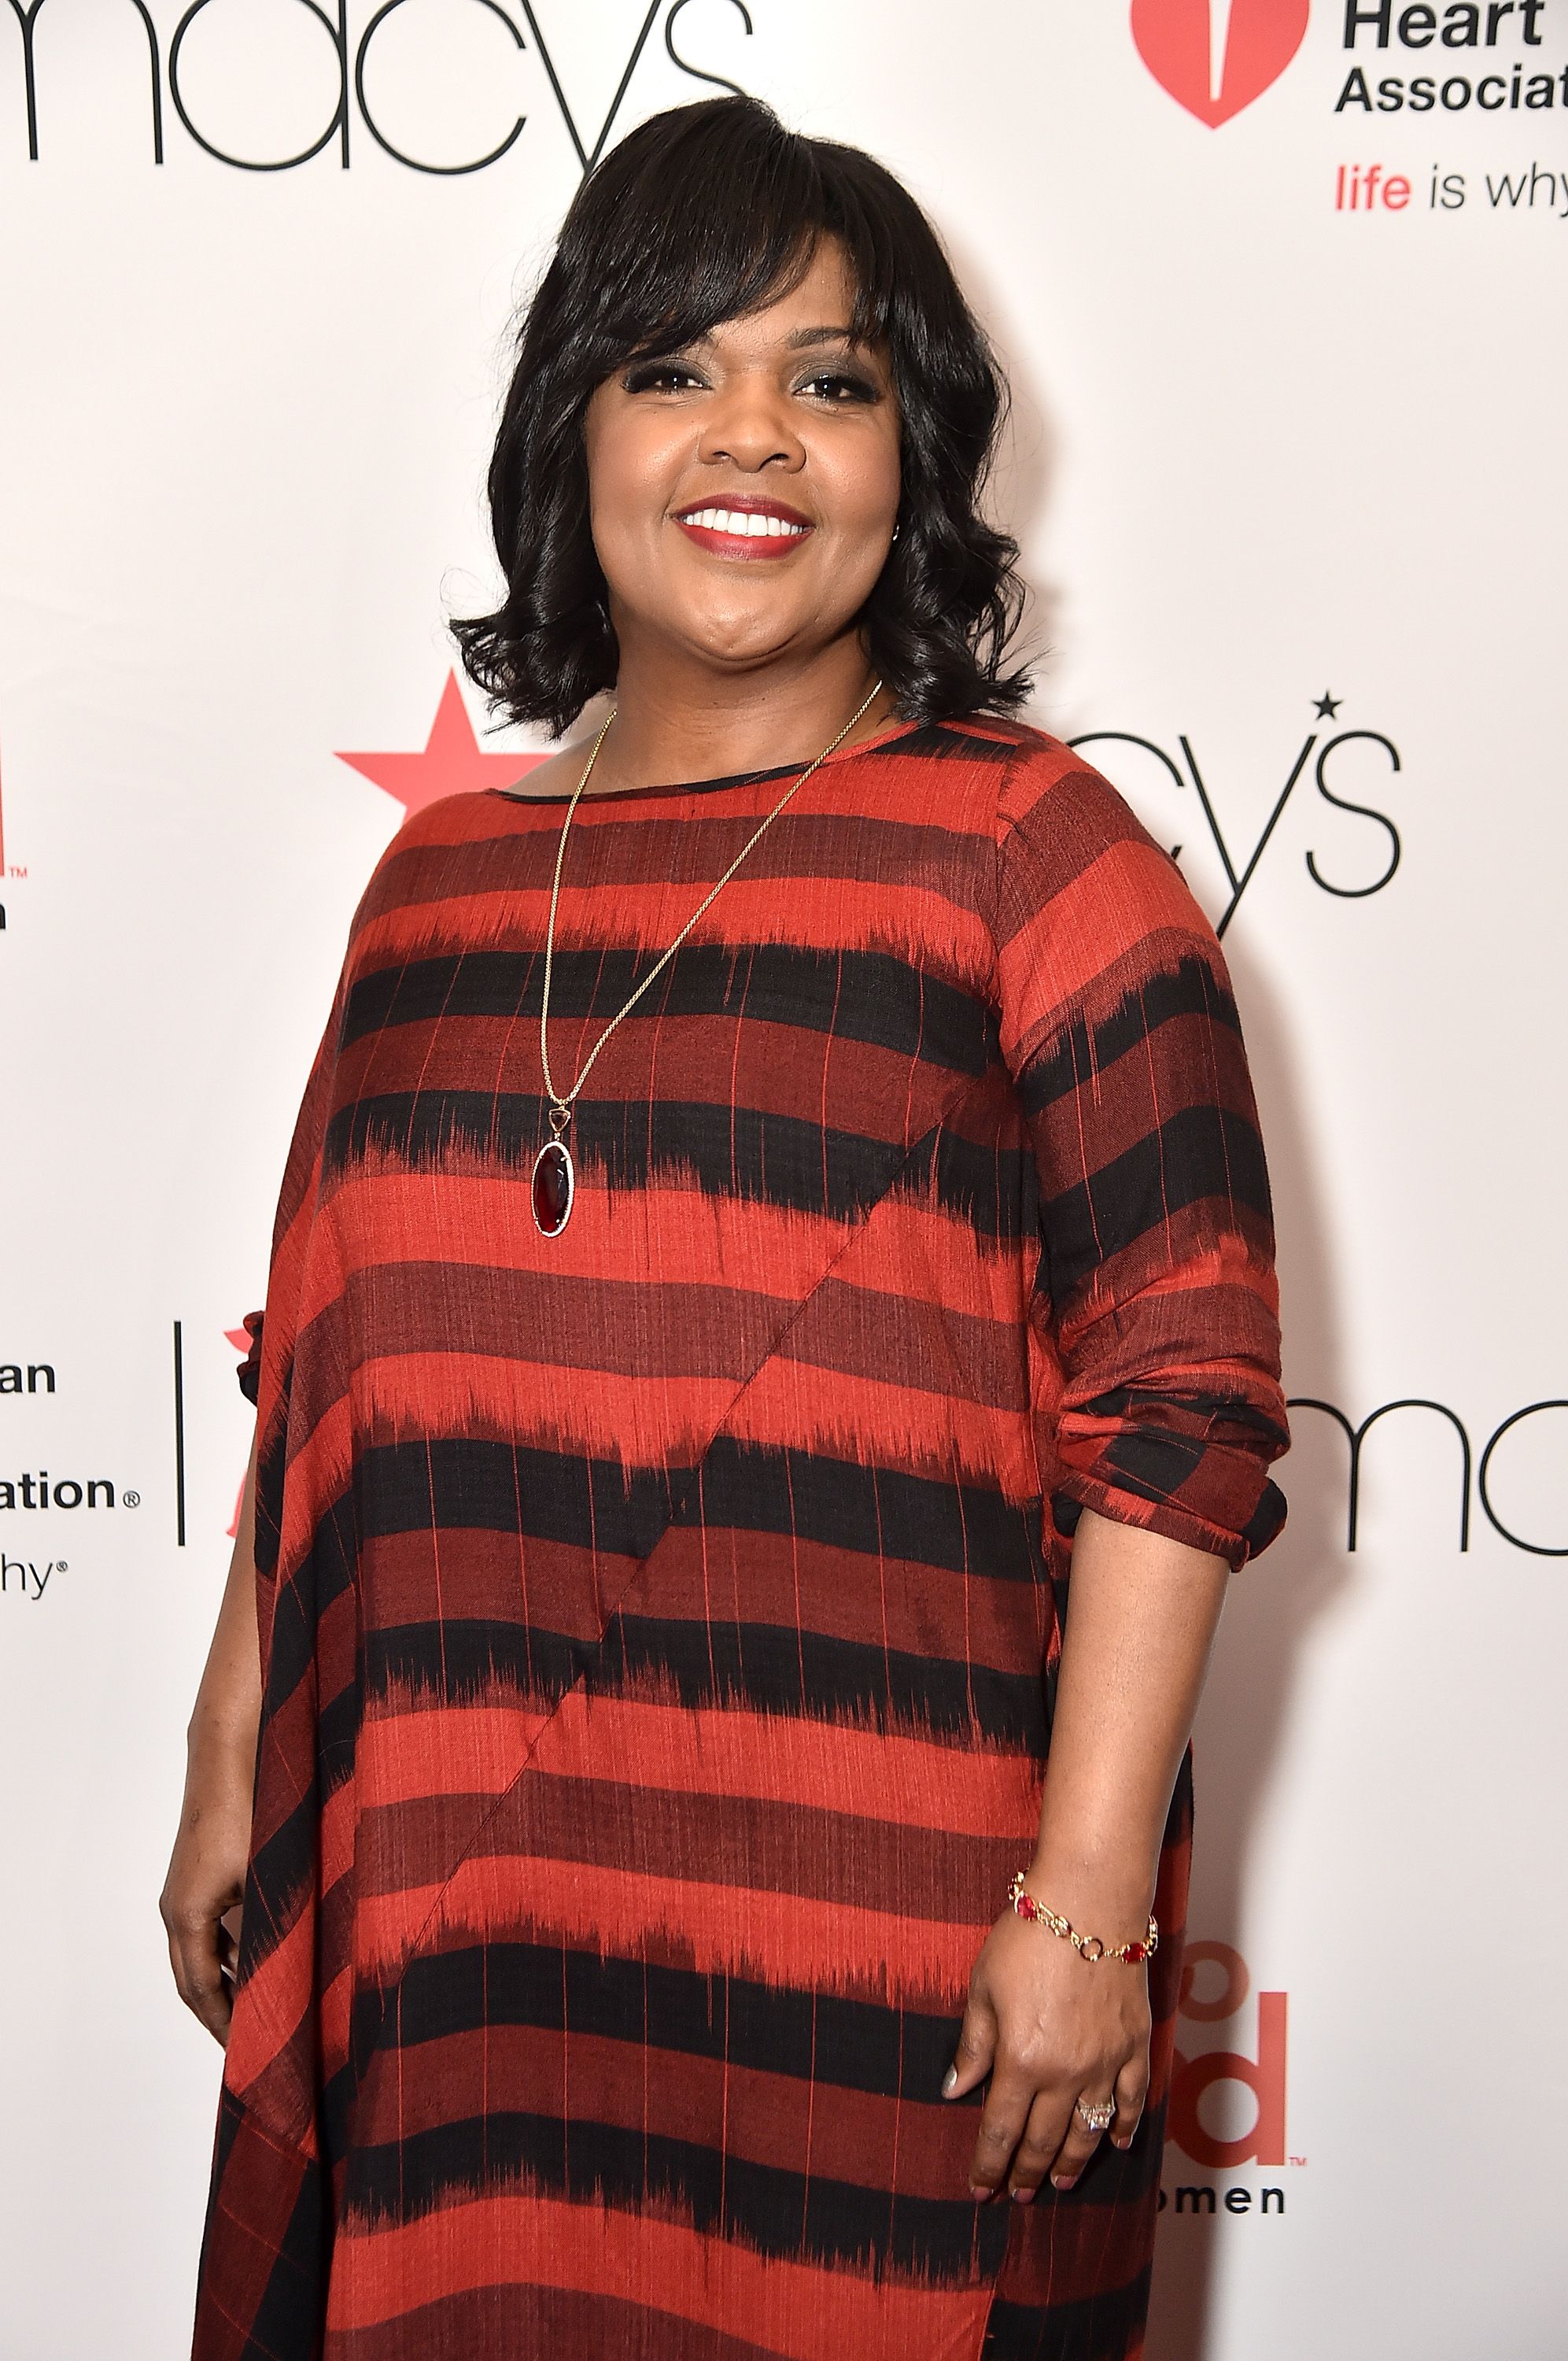 Gospel singer CeCe Winans attends the American Heart Association's Go Red For Women Red Dress Collection 2018 in New York City | Photo: Getty Images